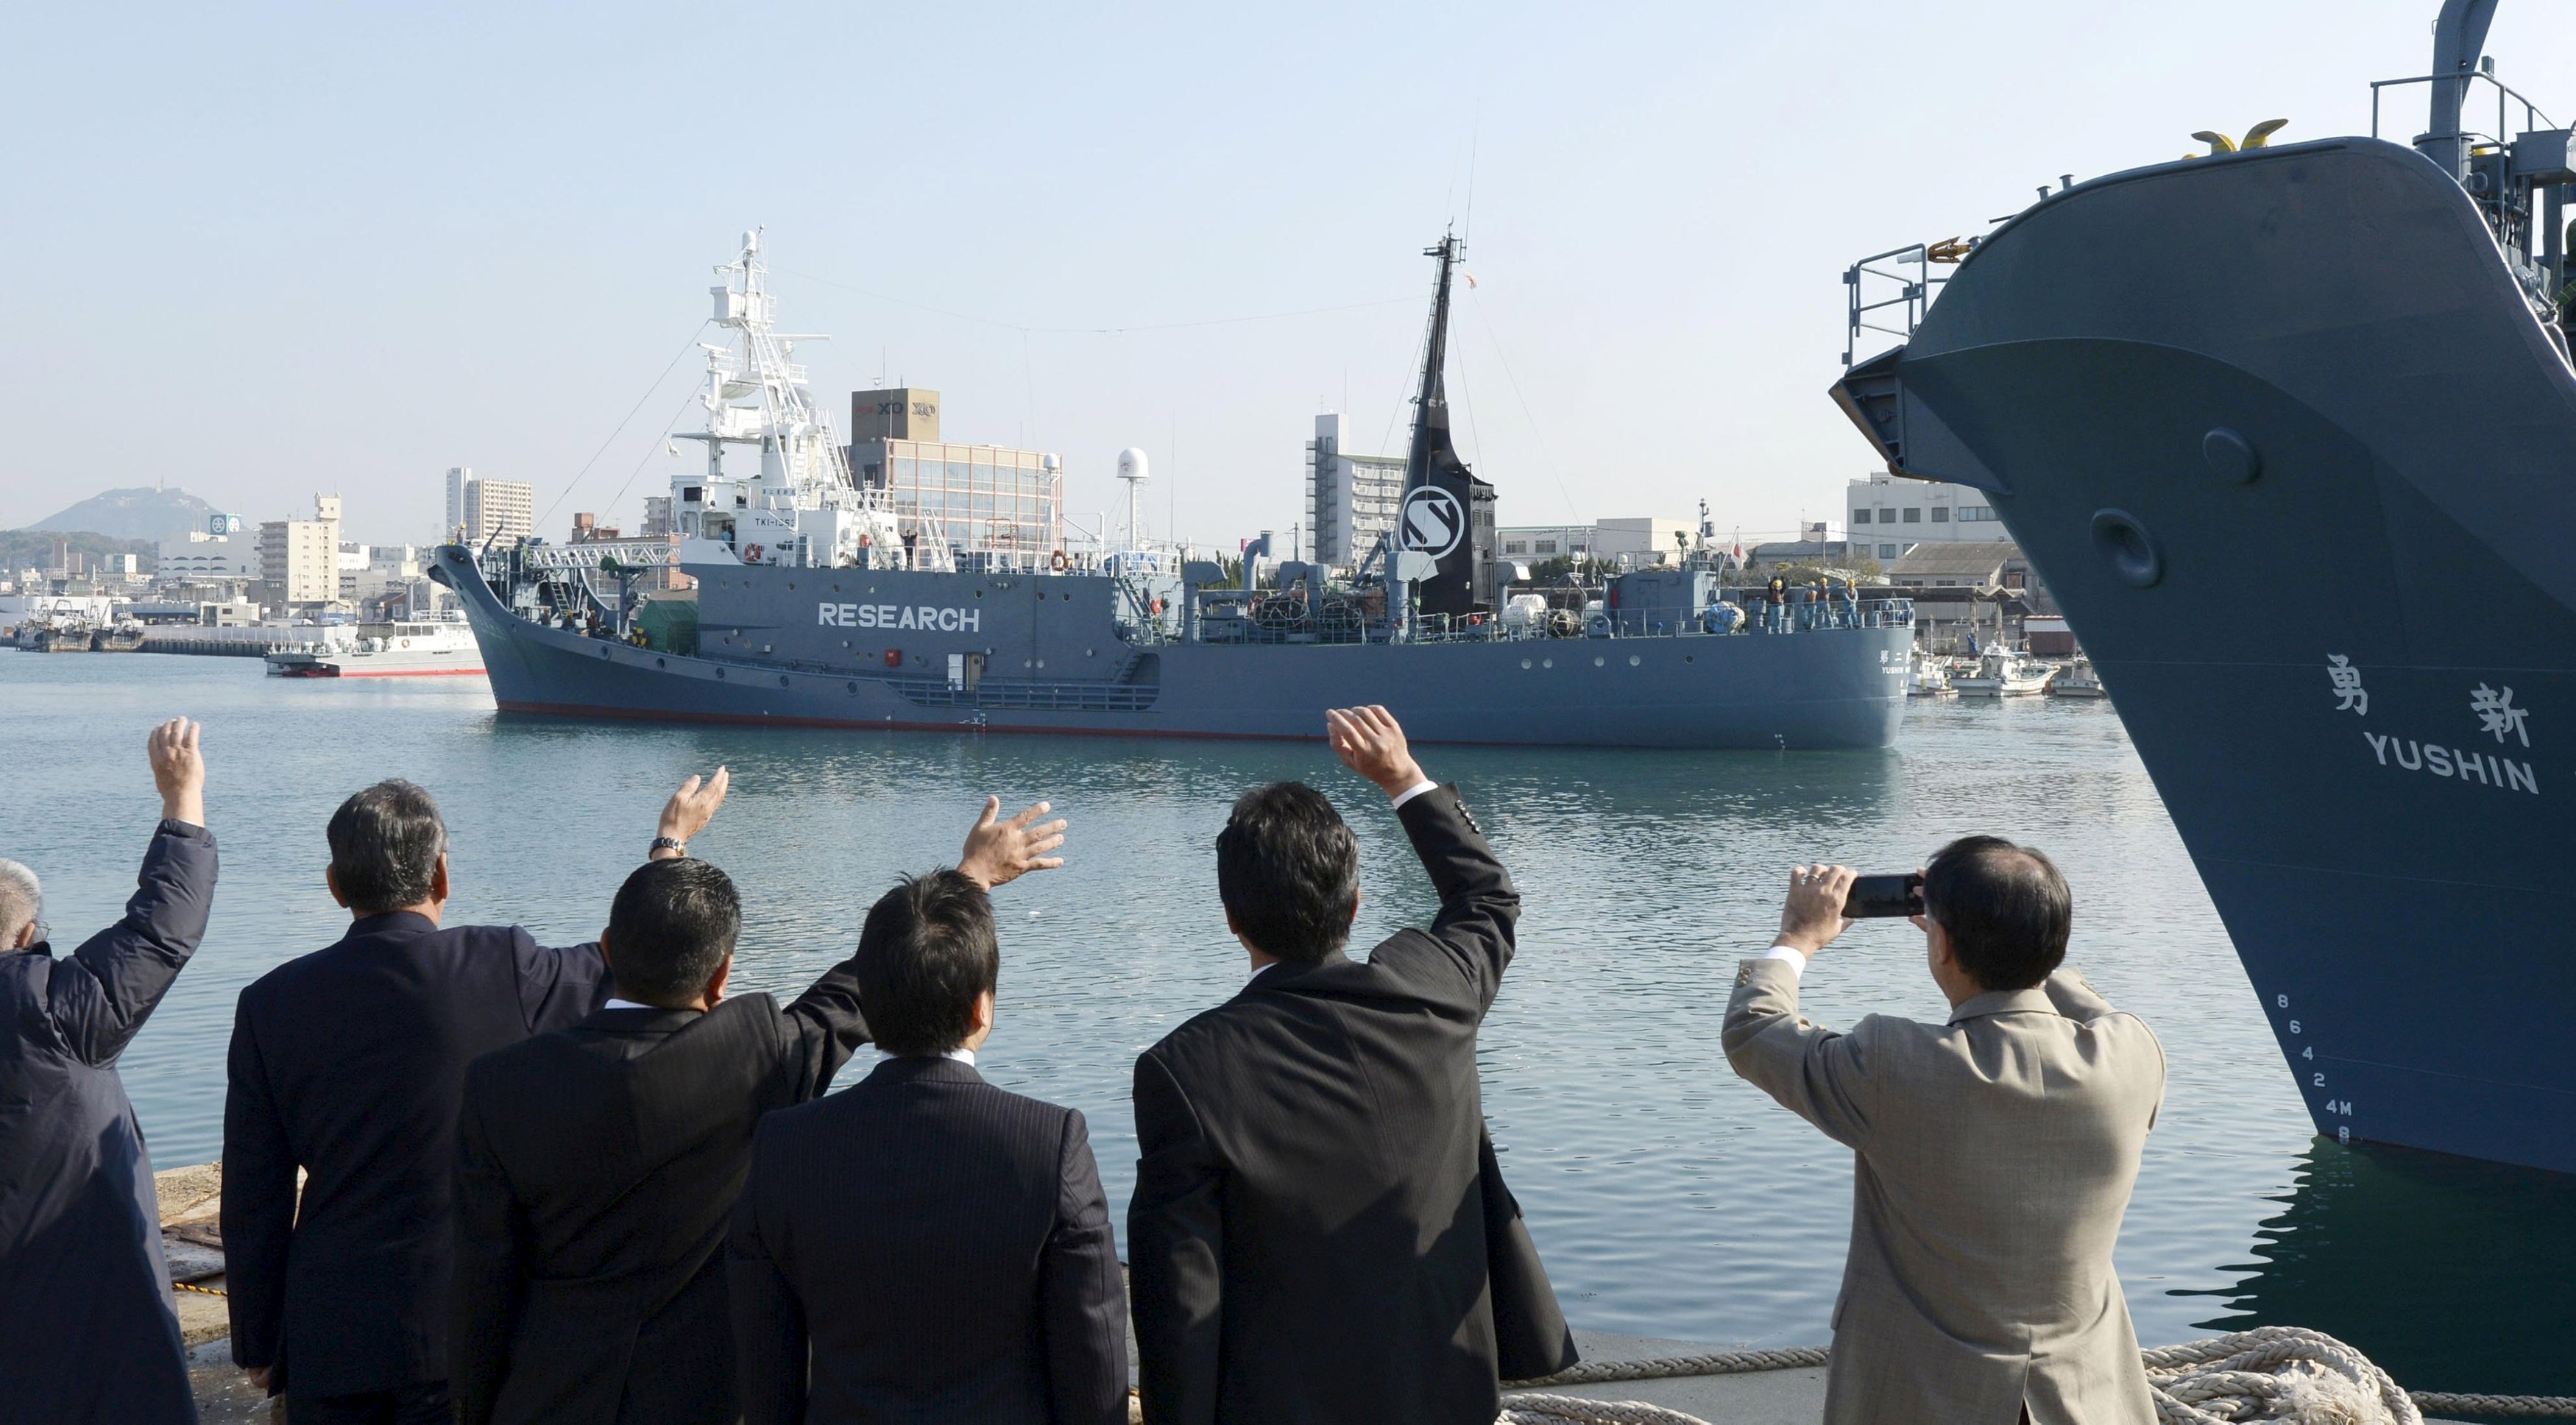 Officials wave as Japanese whaling vessel Yushin Maru No.2 leaves for the Antartic Ocean at a port in Shimonoseki, southwestern Japan on Dec. 1, 2015. (Kyodo/Reuters)